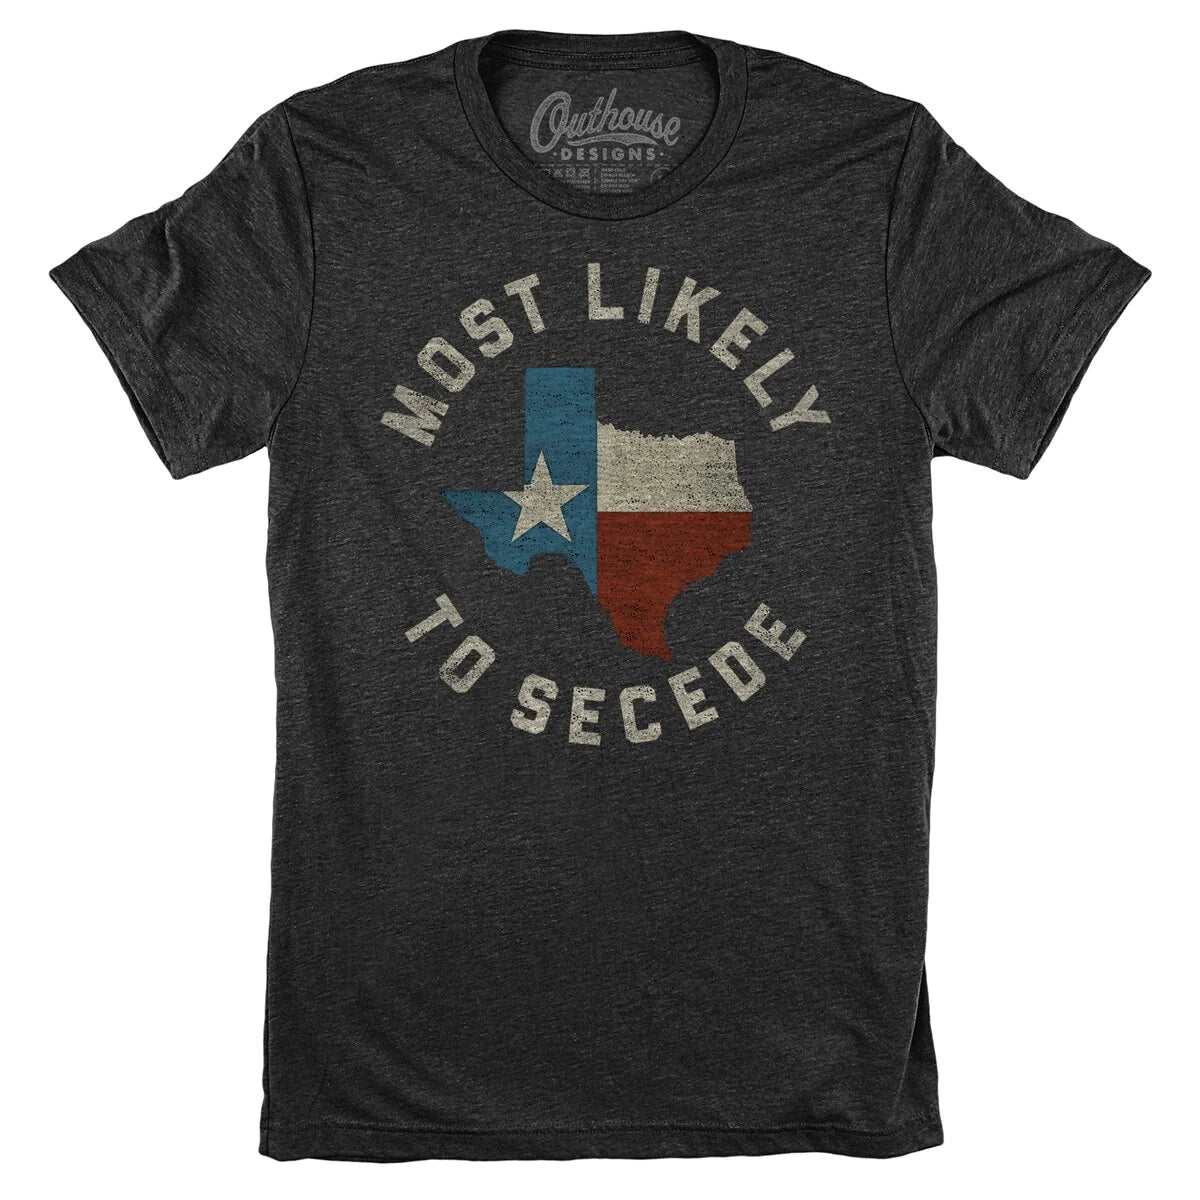 Most Likely To Secede Tee